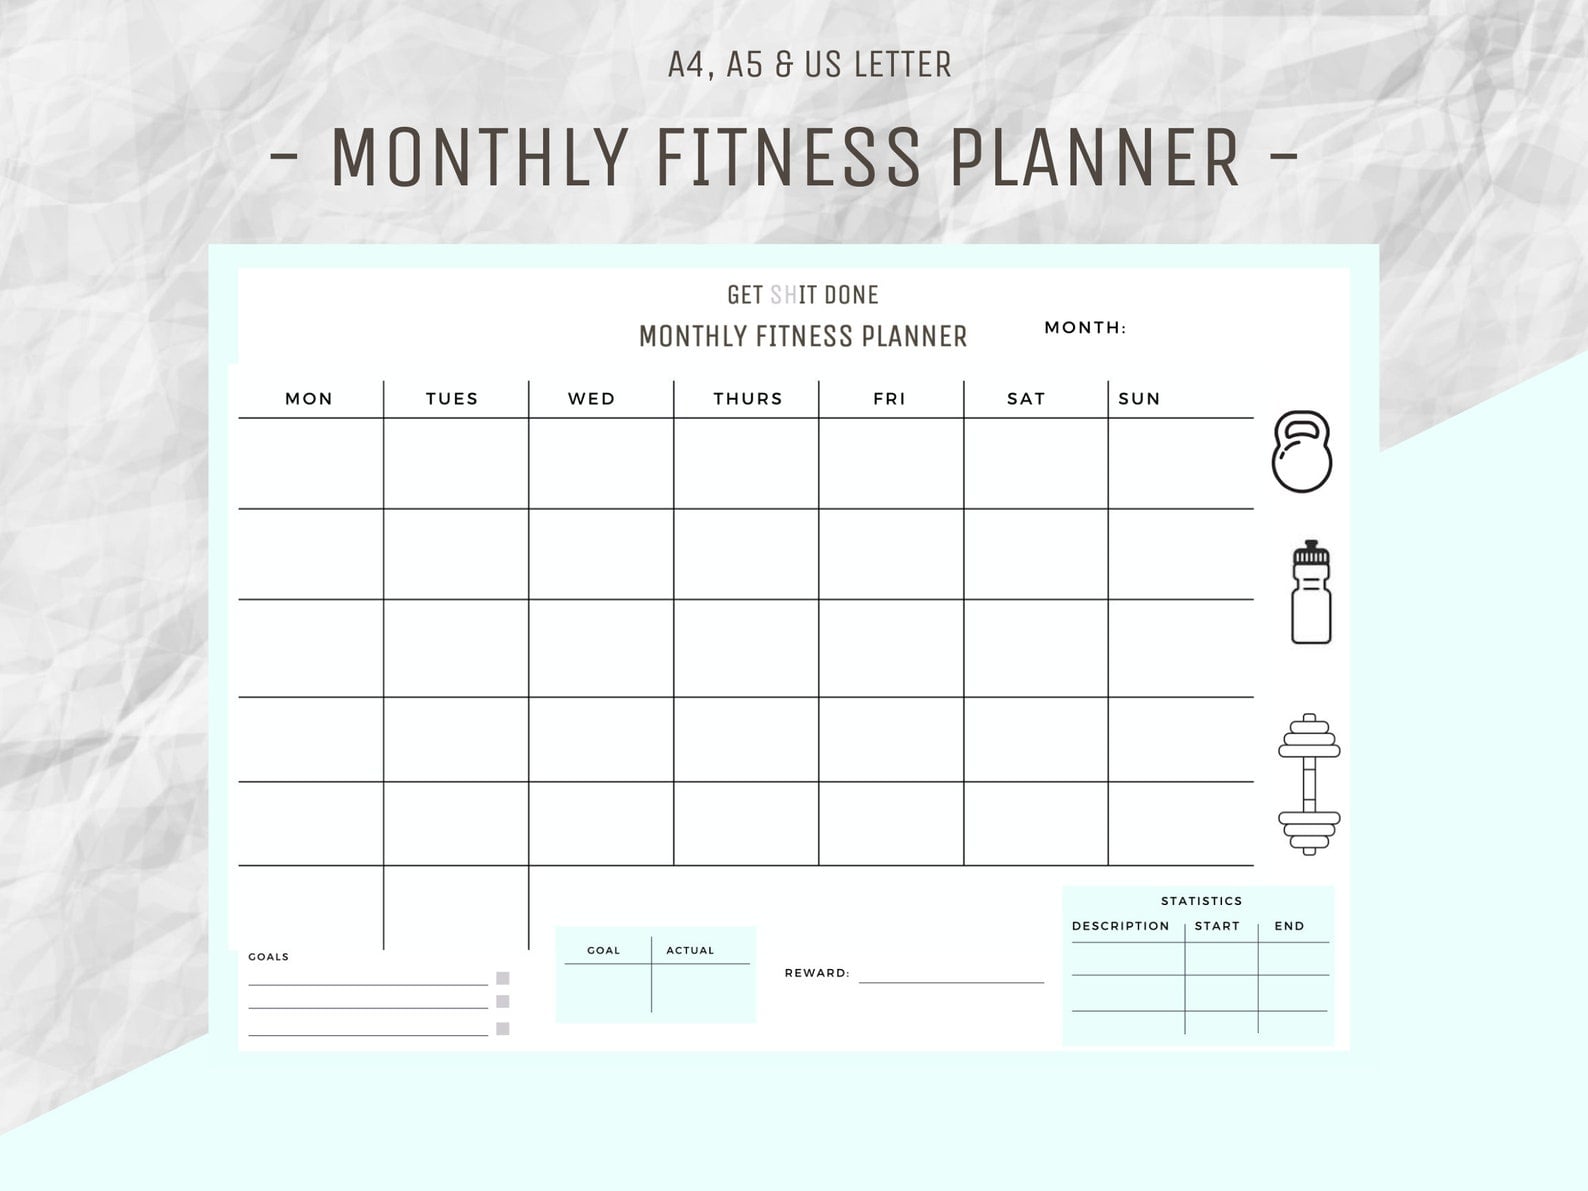 paper-party-supplies-fitness-planner-printable-bundle-goal-setting